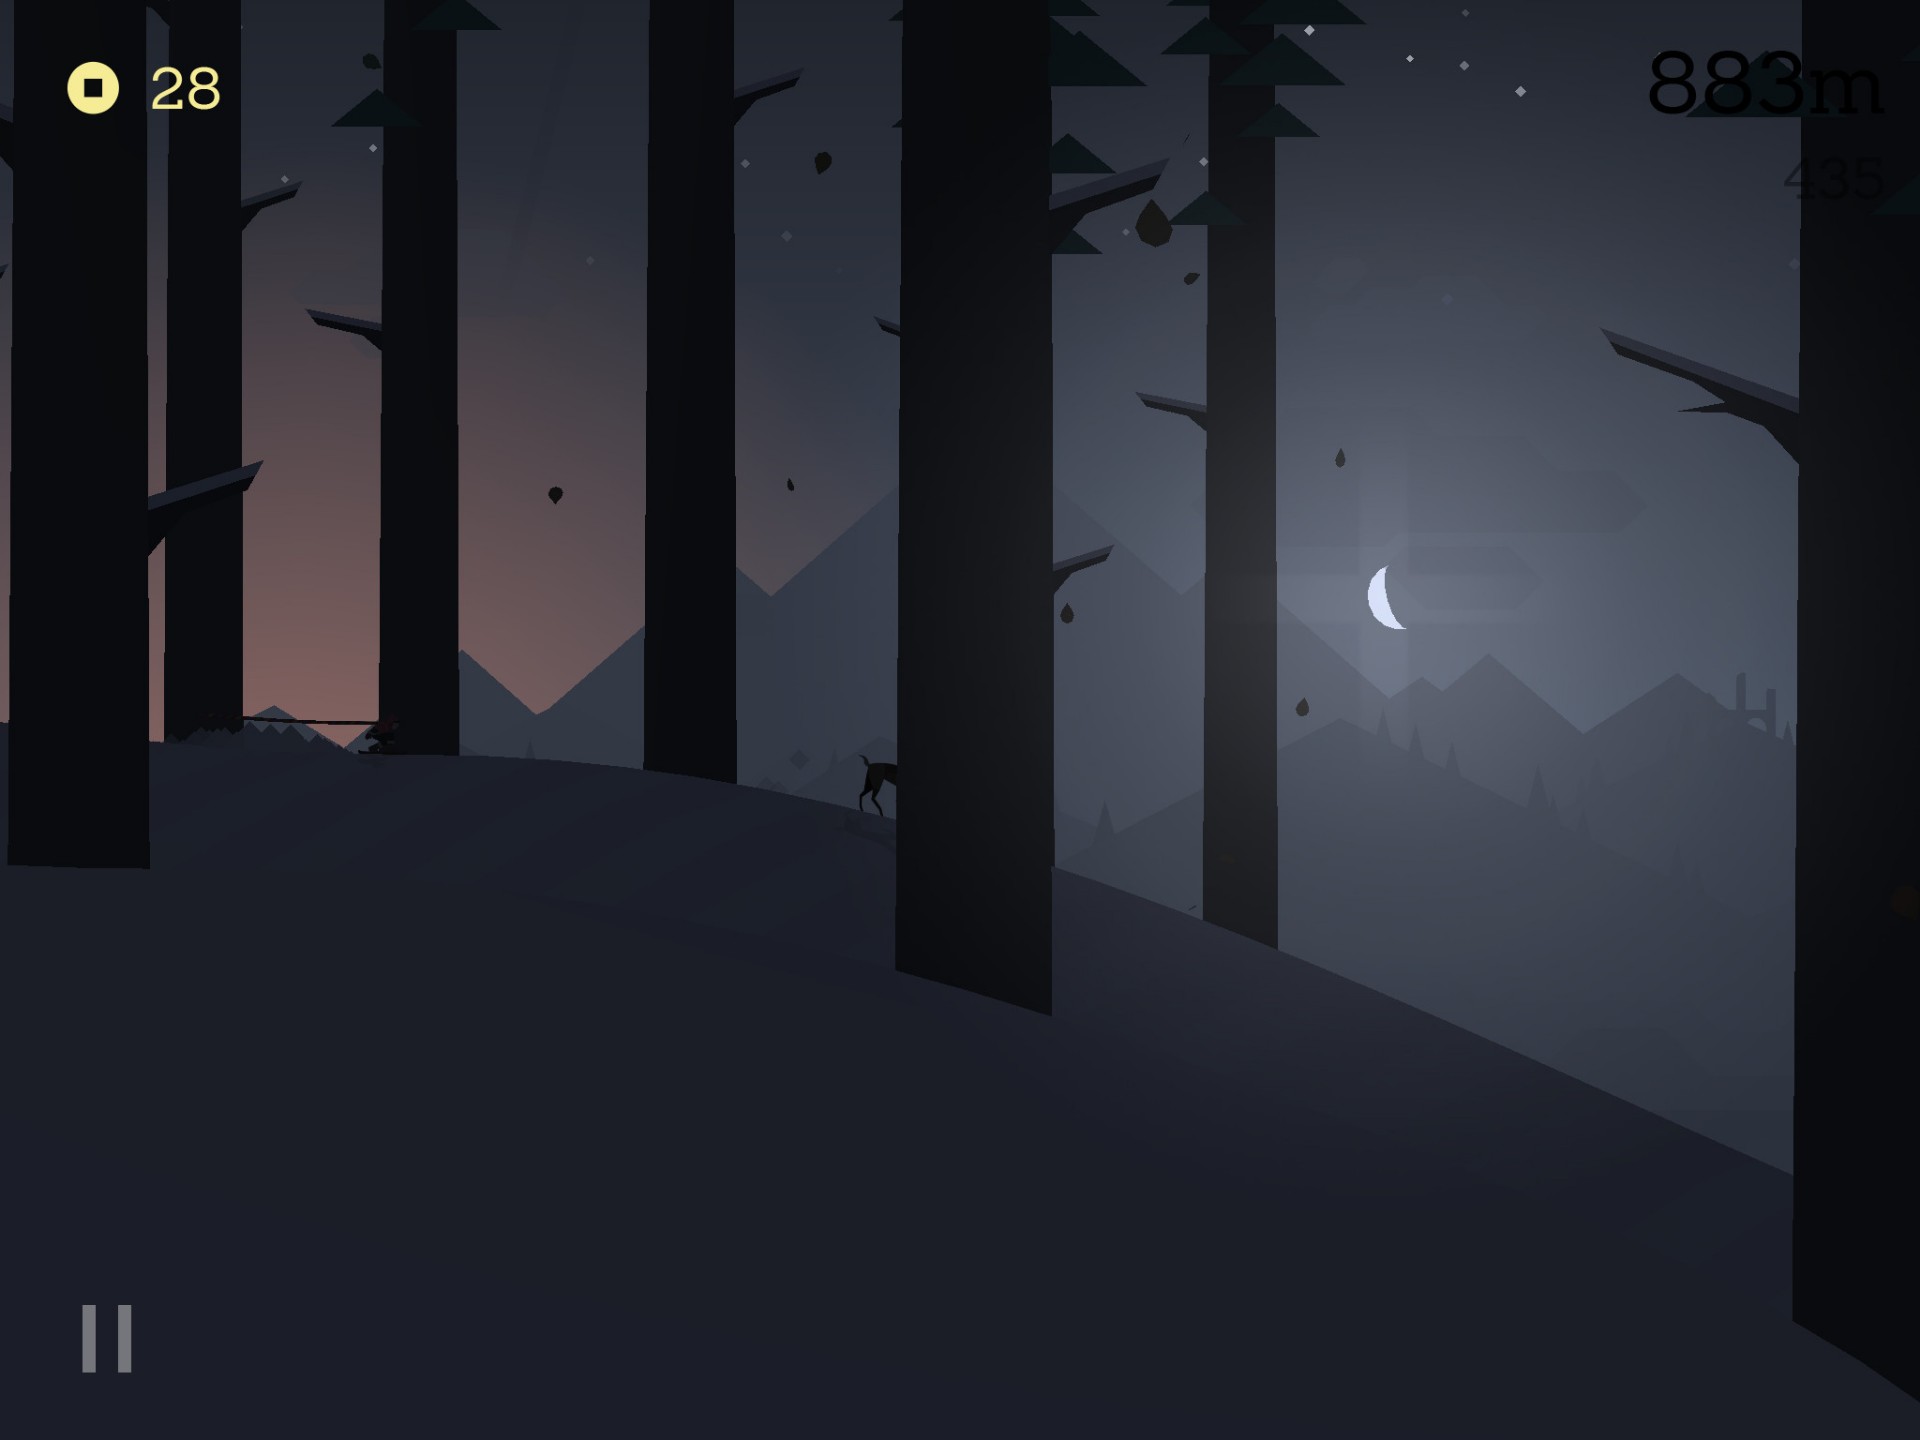 Alto's Adventure - How to Download